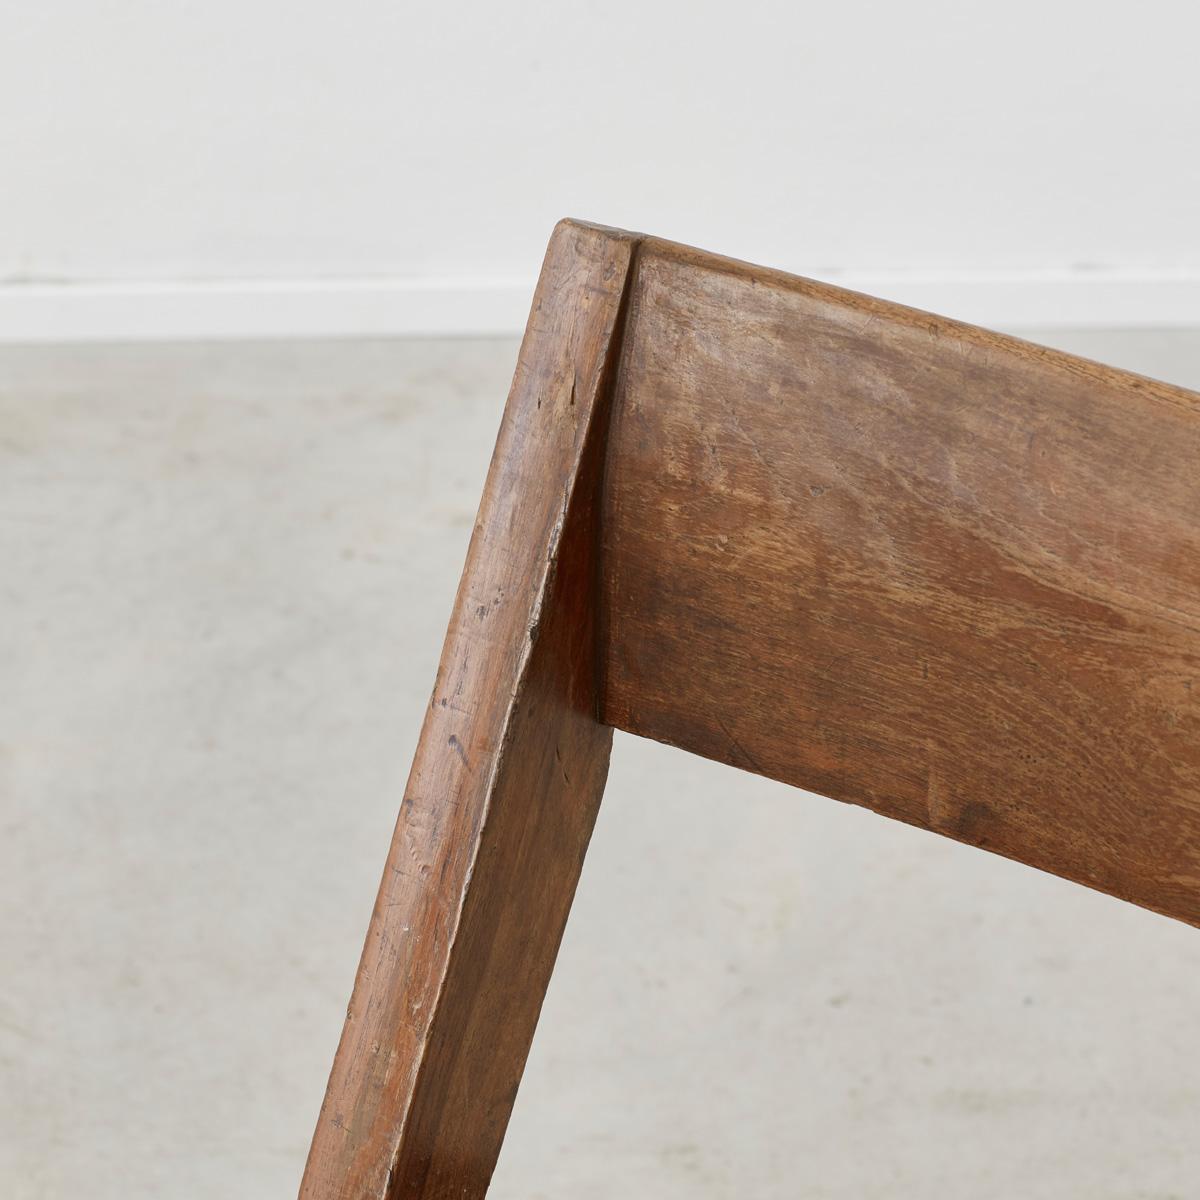 Pierre Jeanneret ‘Library’ chair, model no. PJ-SI-51-A, France/India, 1956 For Sale 3